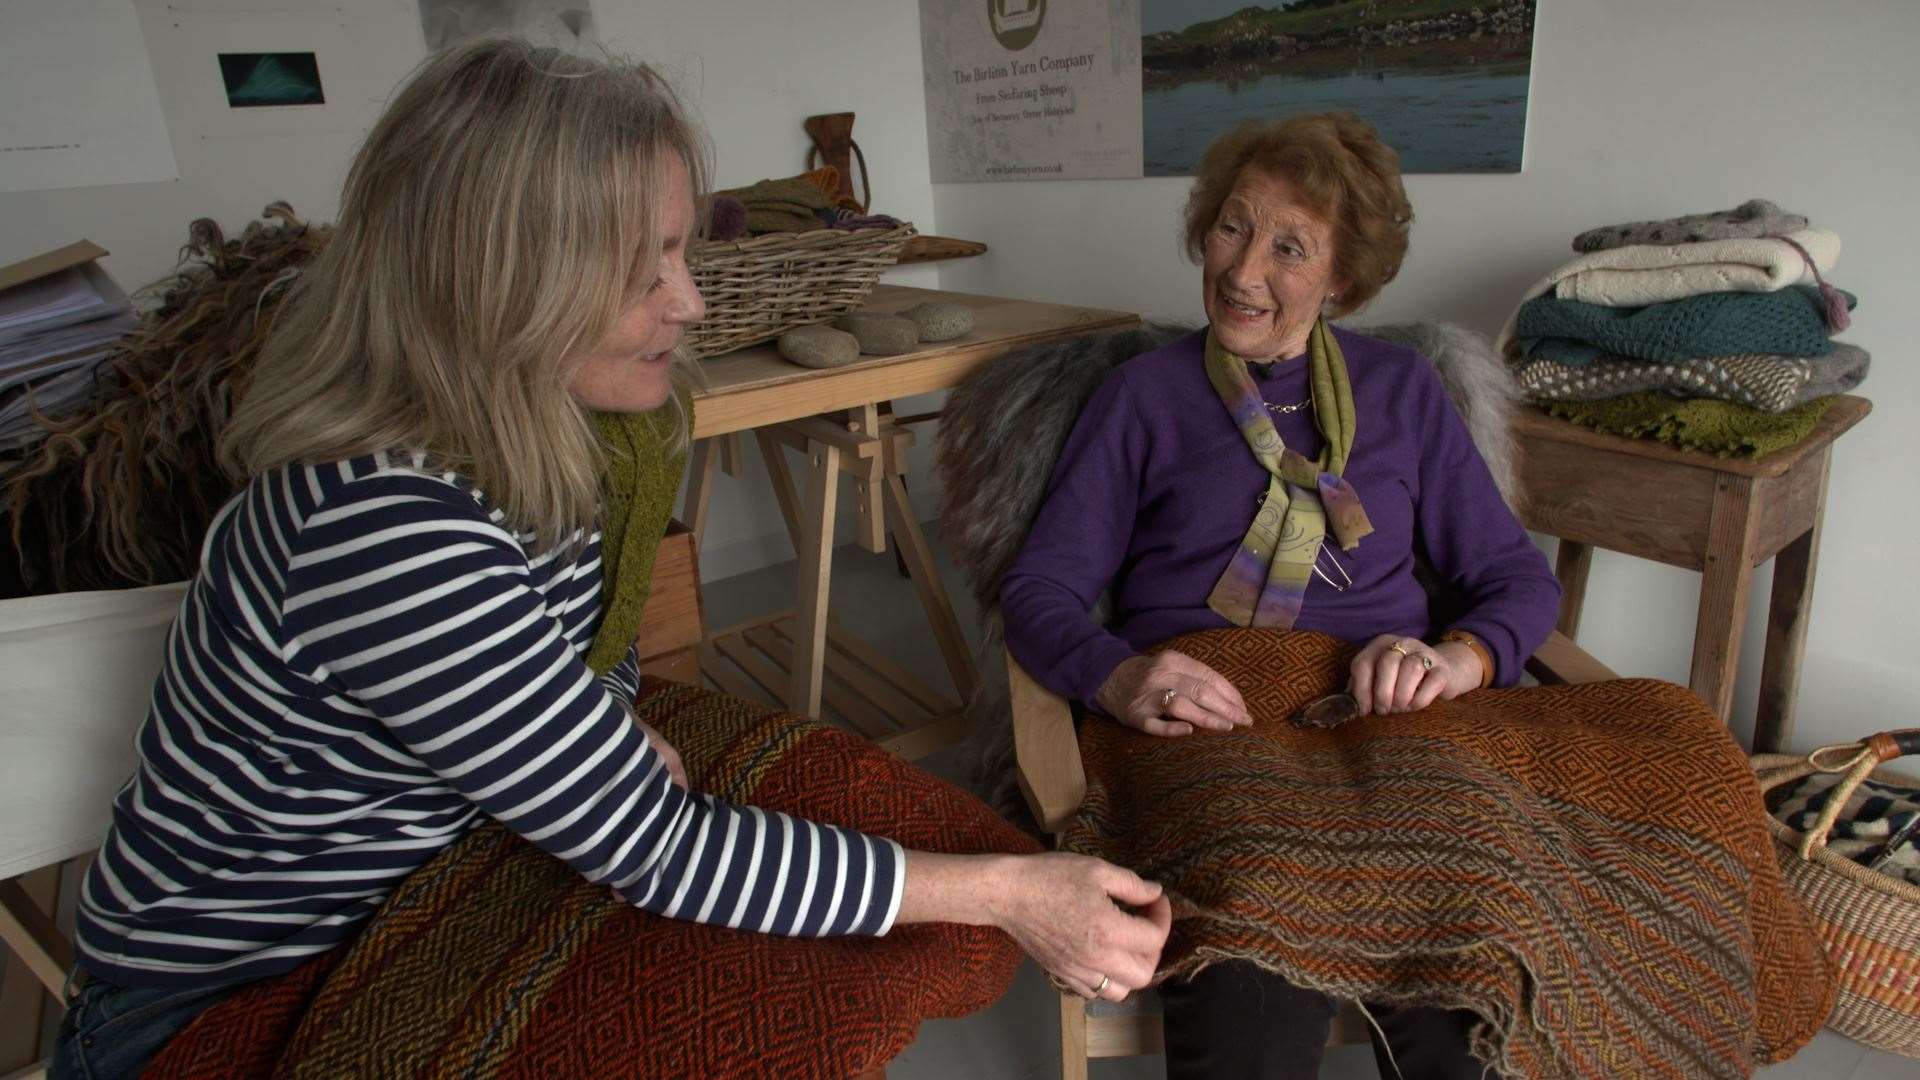 Meg and Jean Rodgers examine different samples of fabric.